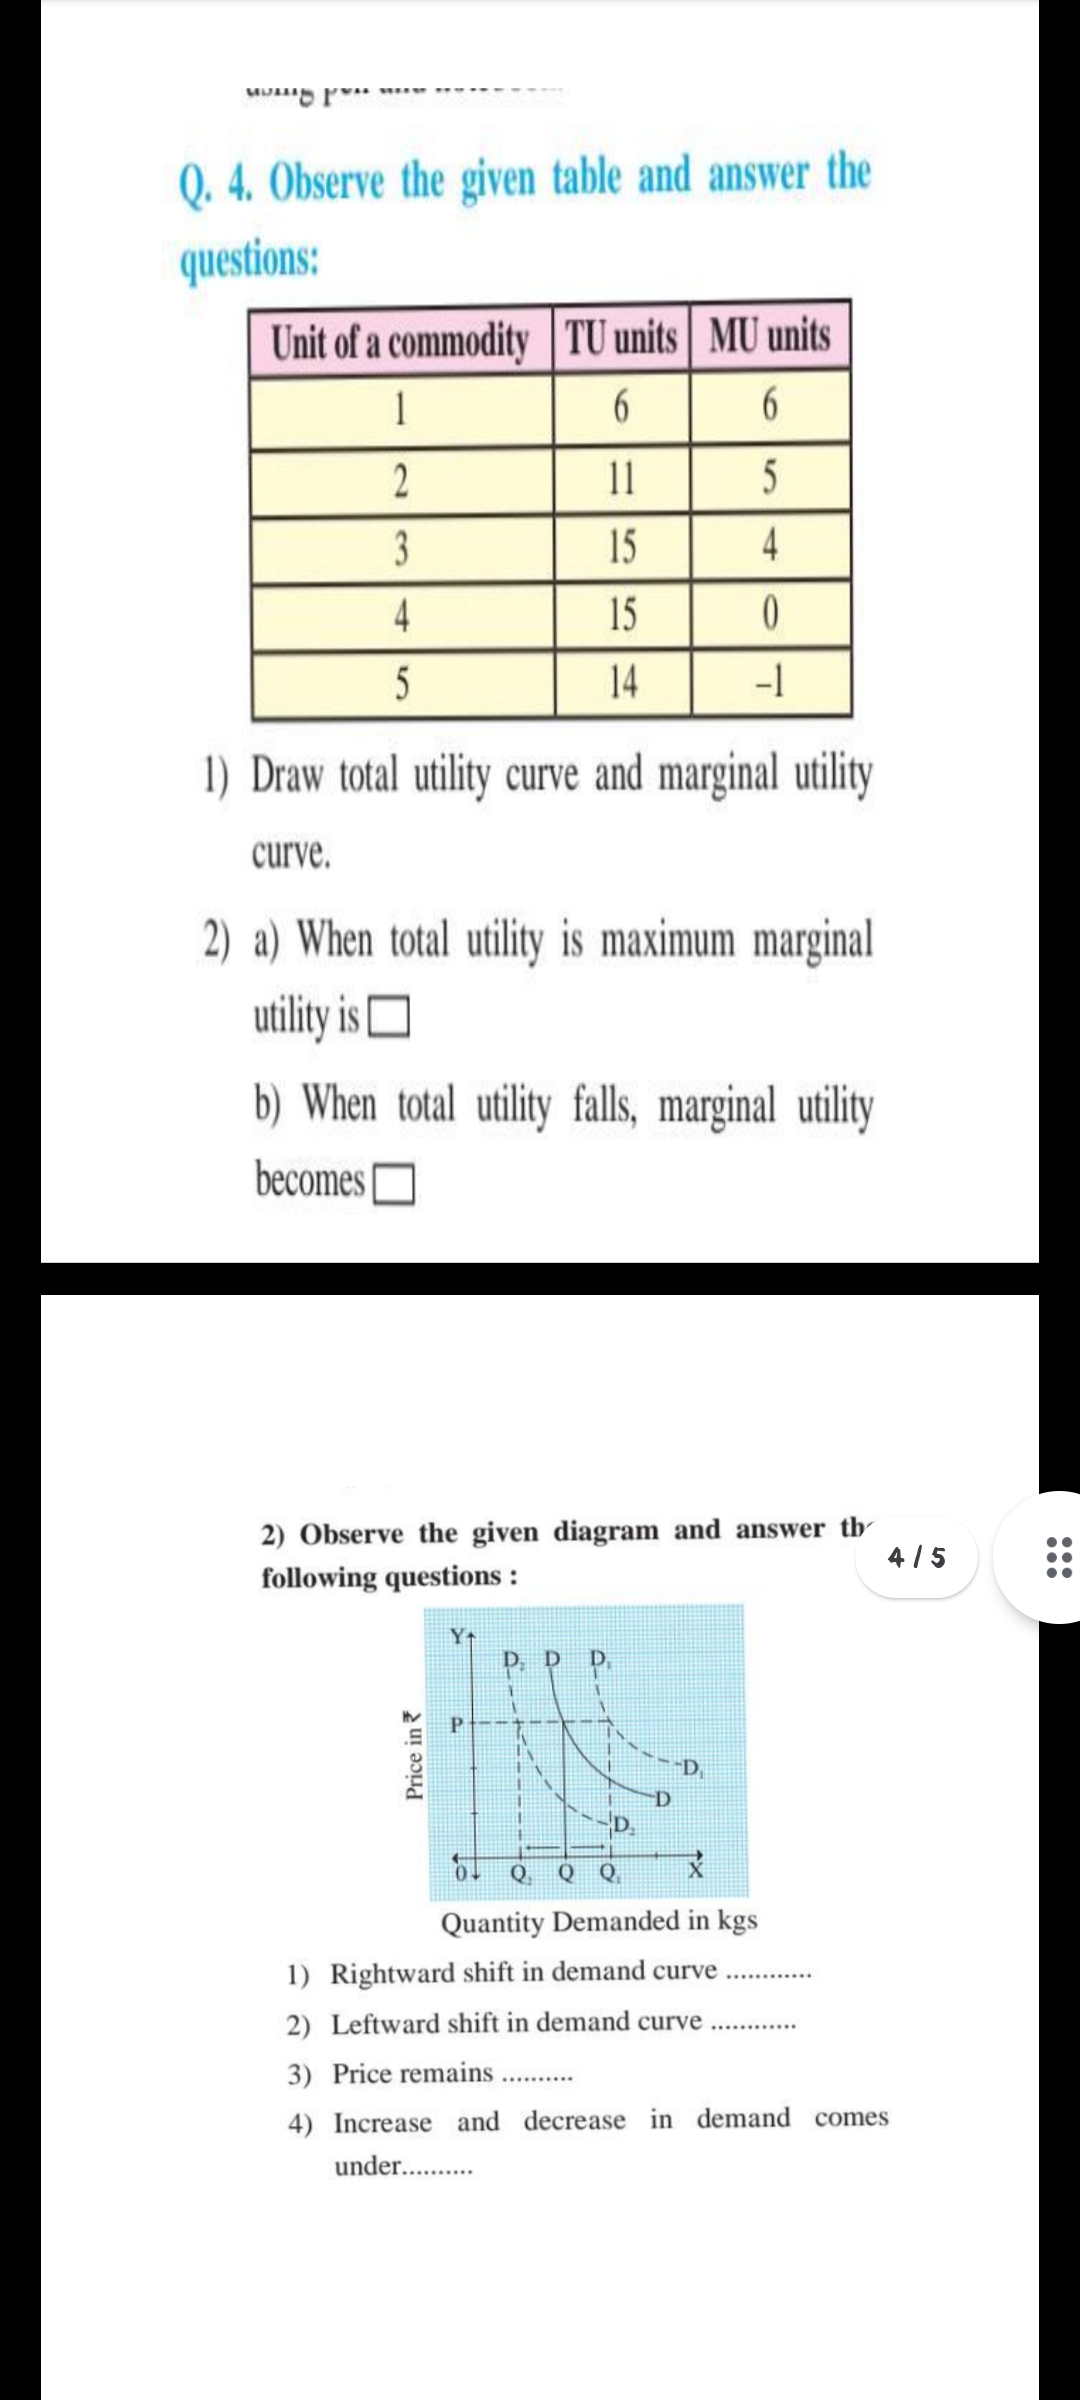 Q. 4. Observe the given table and answer the
questions:
Unit of a commodity TU units MU units
1
11
5
3
15
4
4
15
5
14
-1
1) Draw total utility curve and marginal utility
curve.
2) a) When total utility is maximum marginal
utility is O
b) When total utility falls, marginal utility
becomes|
2) Observe the given diagram and answer th
4 /5
following questions :
D. D
D.
P.
-D
Q
Q
Q
Quantity Demanded in kgs
1) Rightward shift in demand curve
2) Leftward shift in demand curve
3) Price remains
..........
4) Increase and decrease in demand comes
under. .
Price in ?
